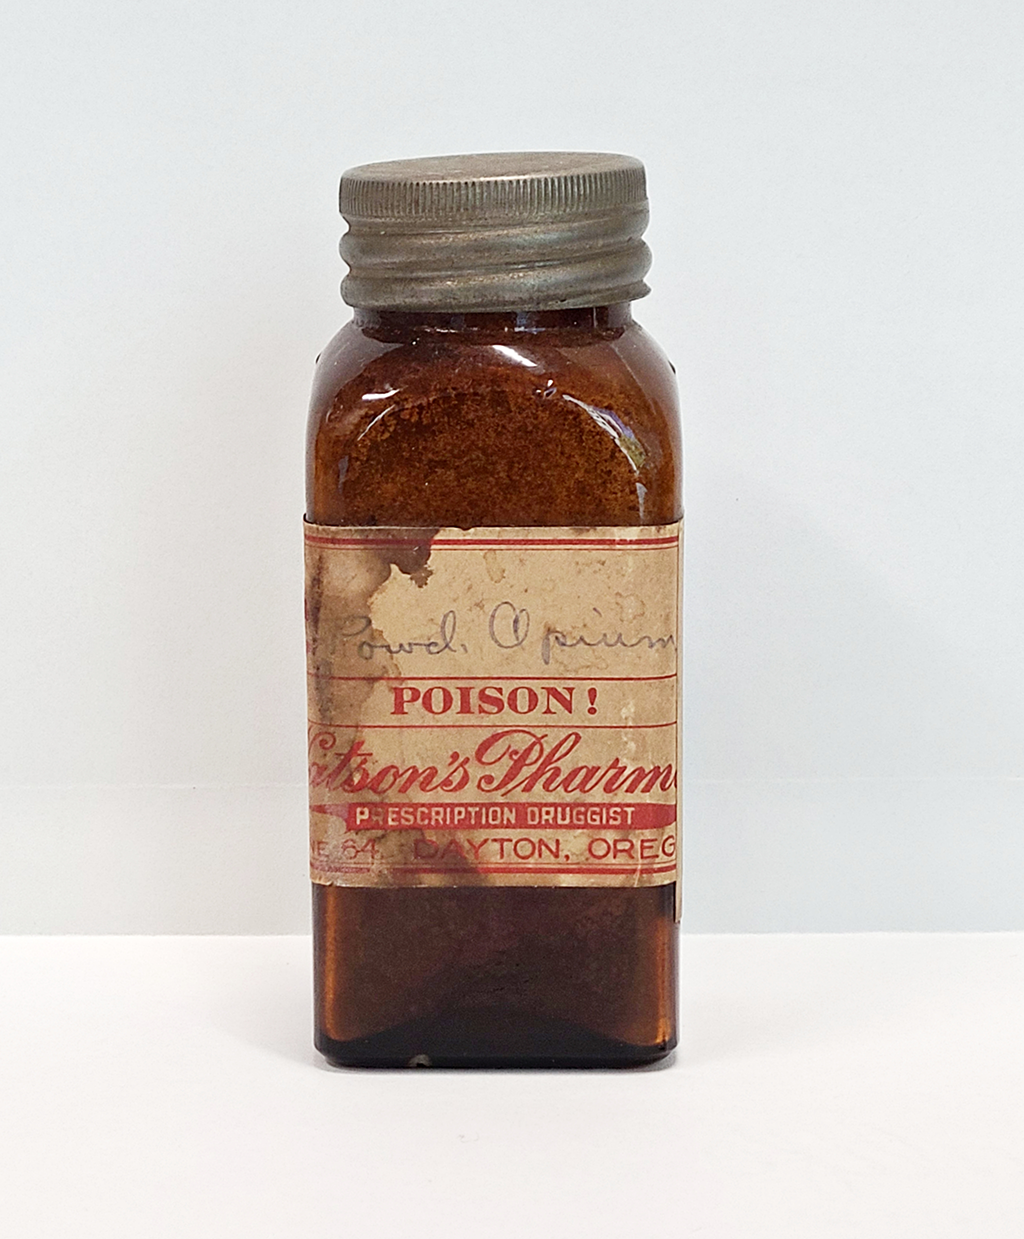 A dark amber vial bears a label marked "Poison!"